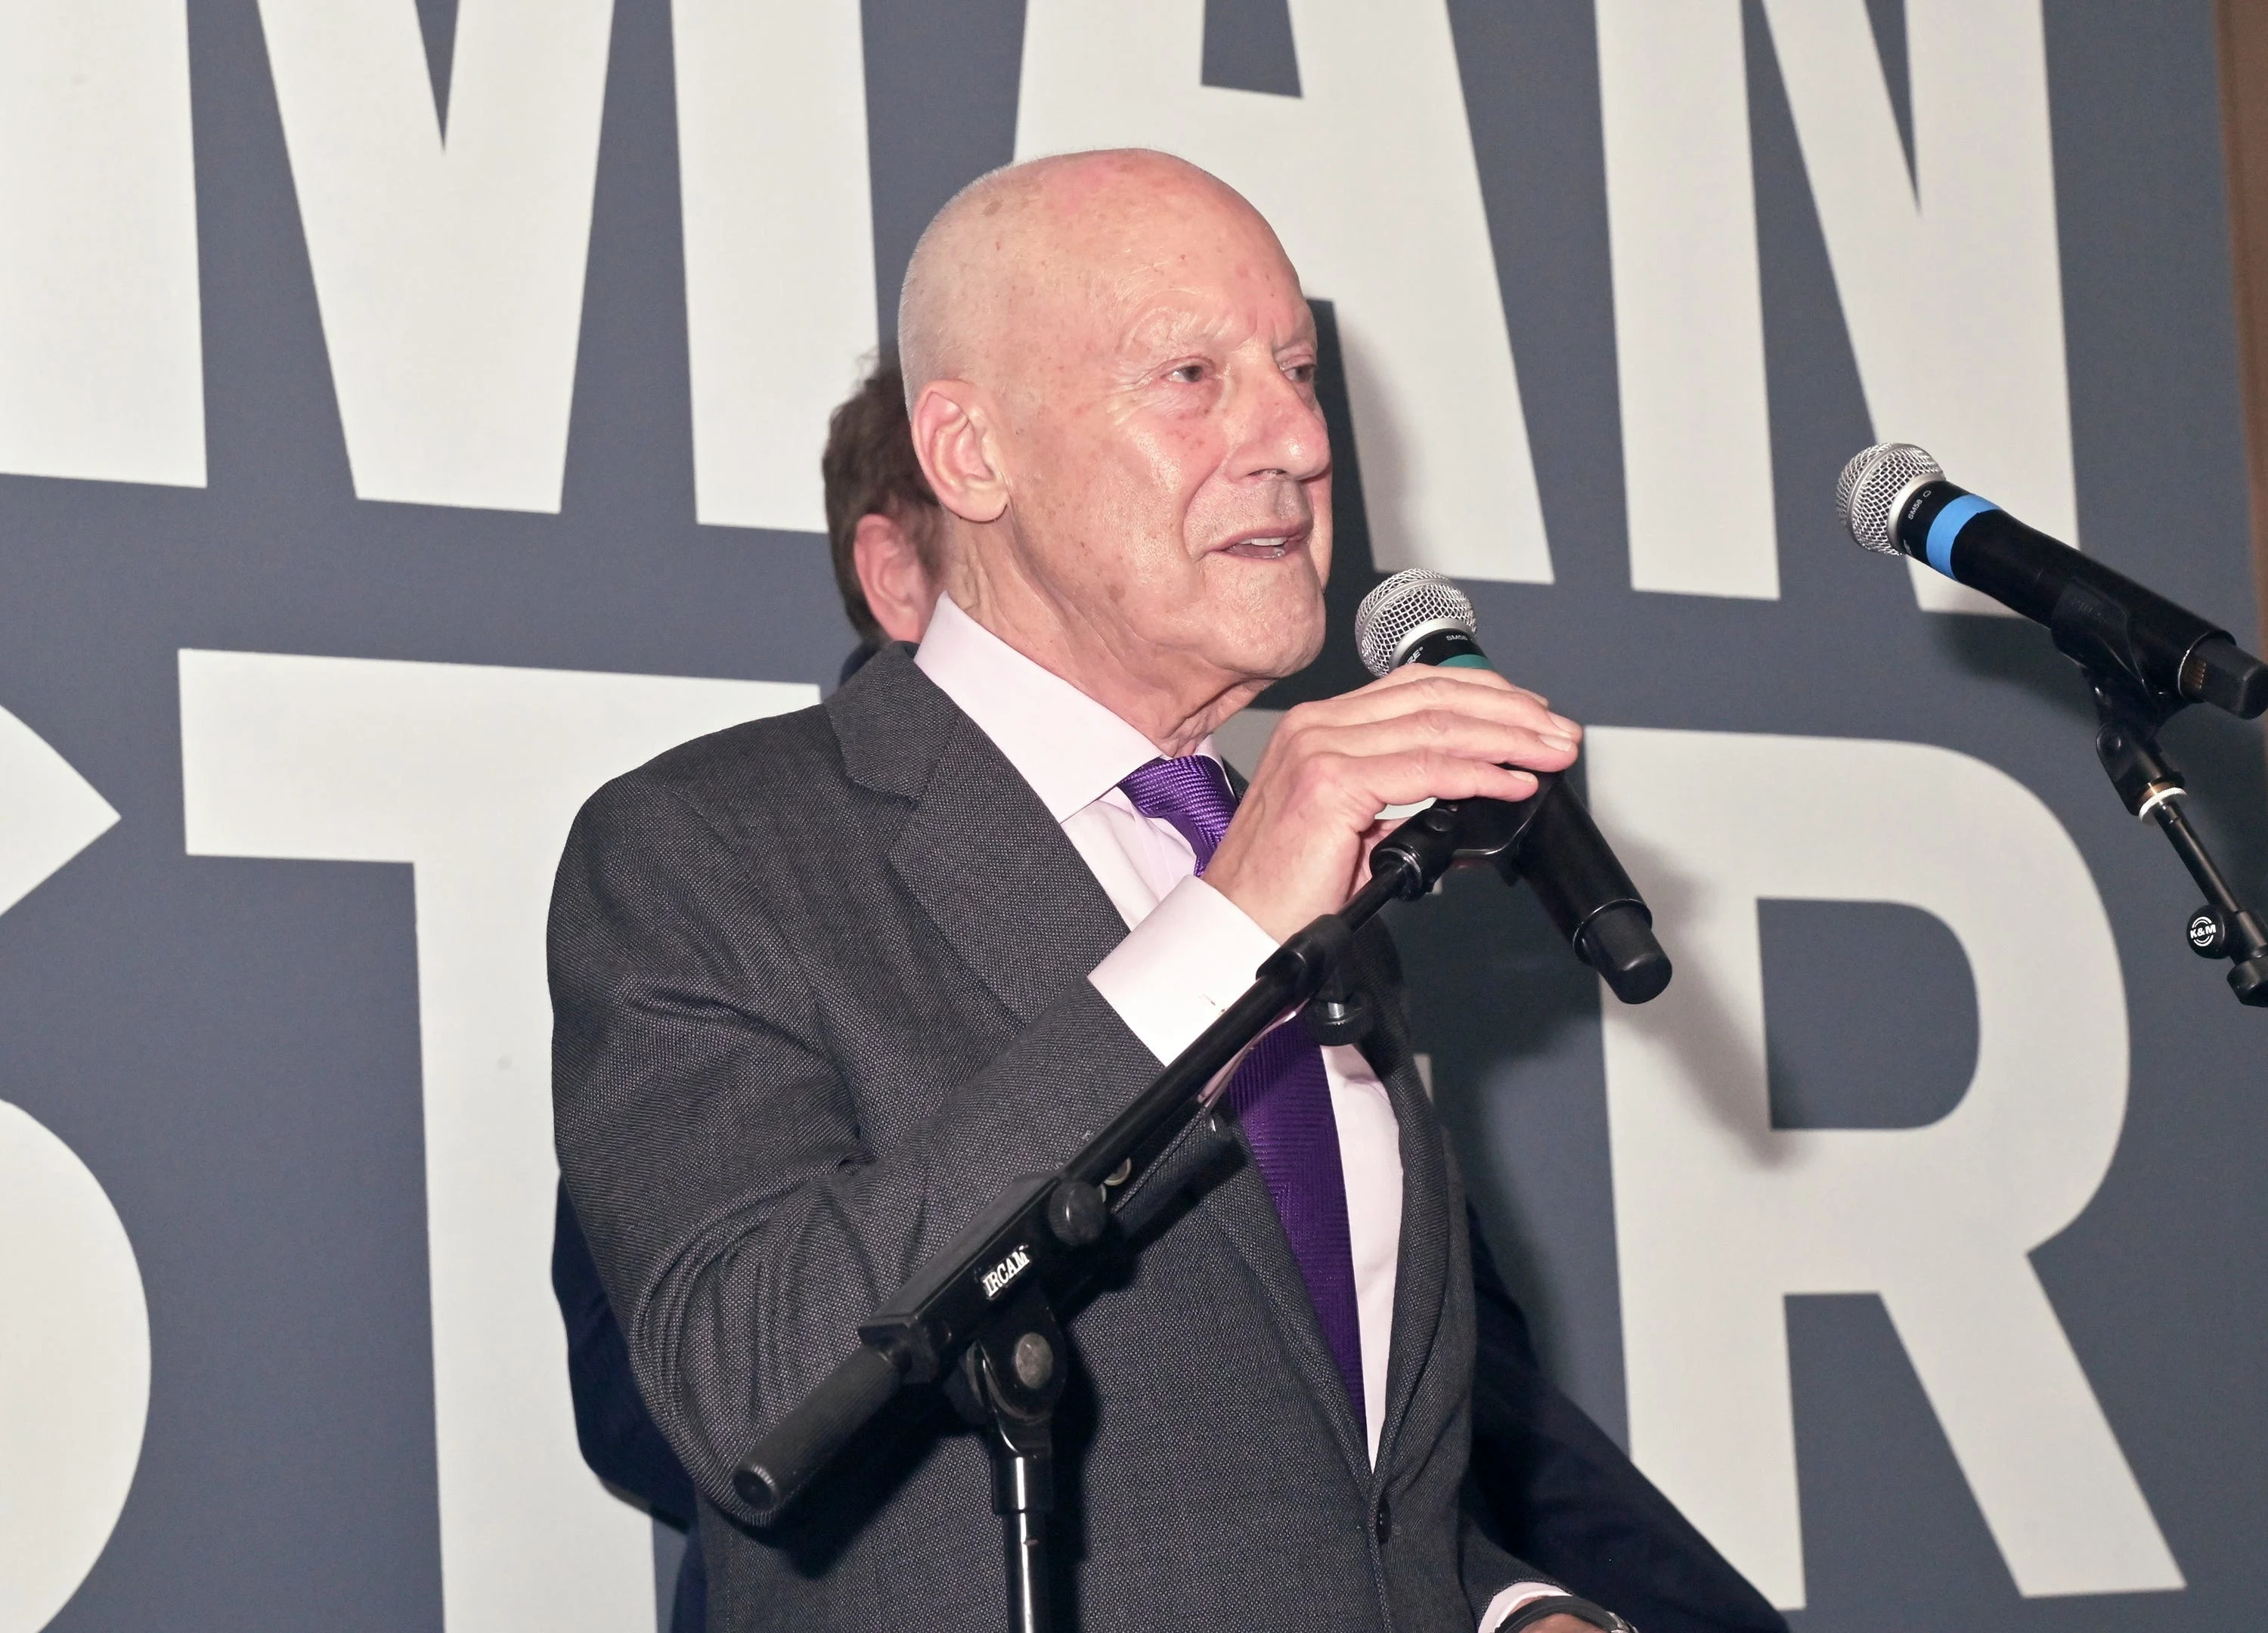 Architect Norman Foster speaks at a podium